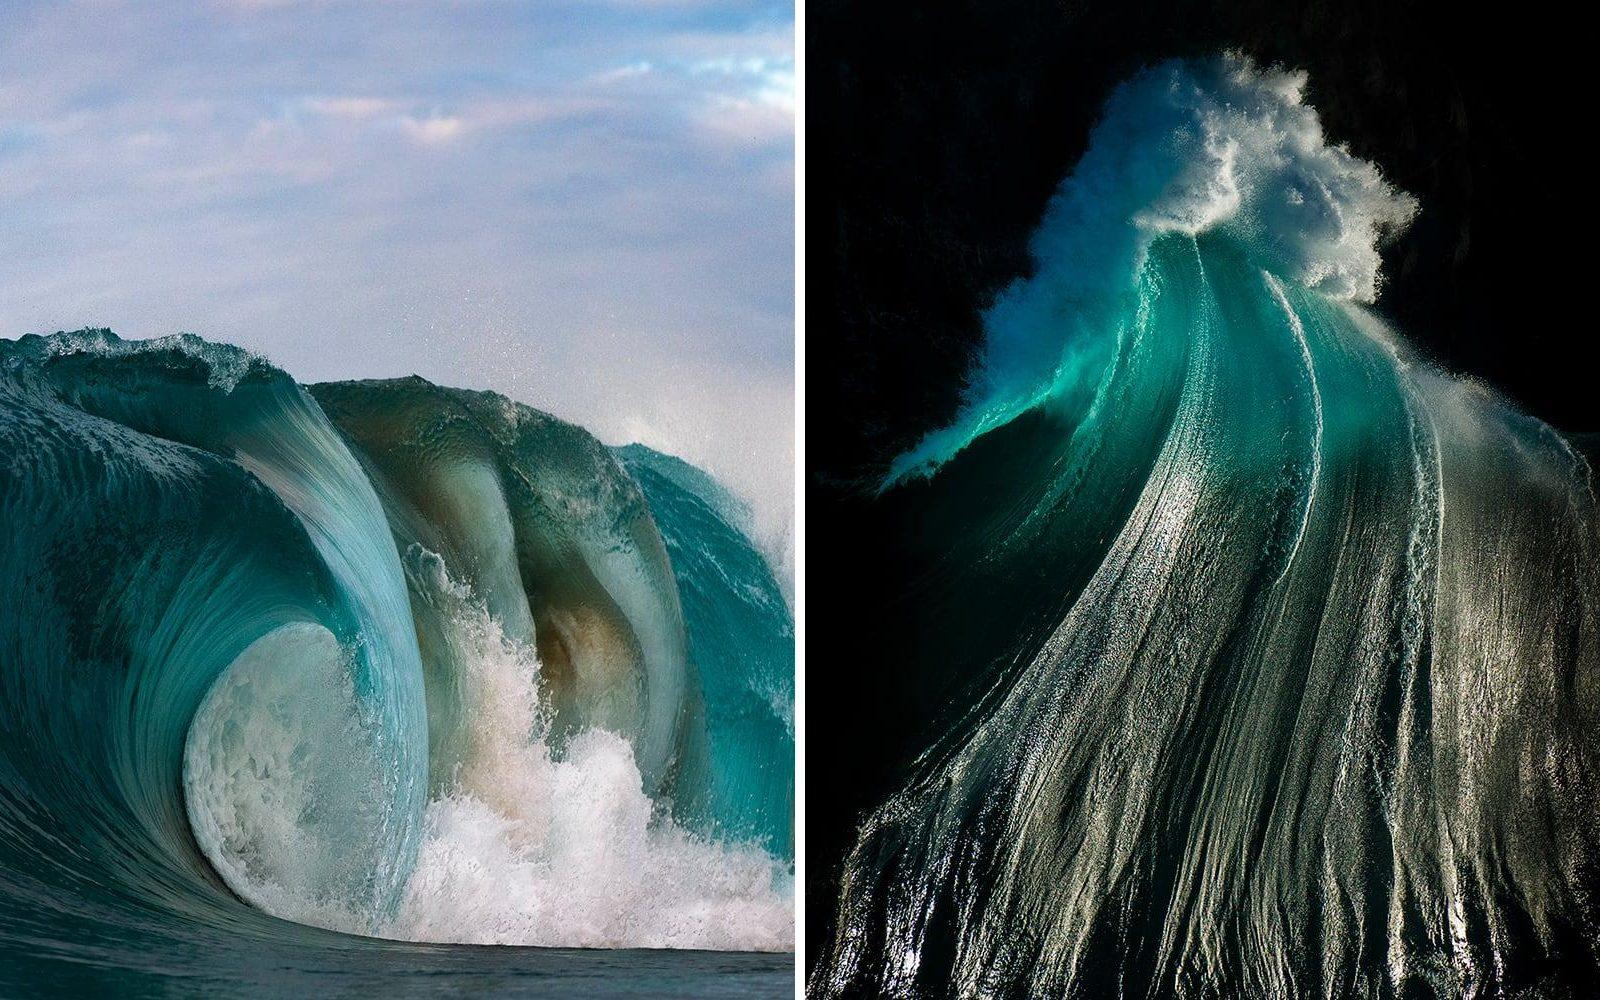 Ray Collins dramatic images that capture the diversity of textures and forms that emerge from the water